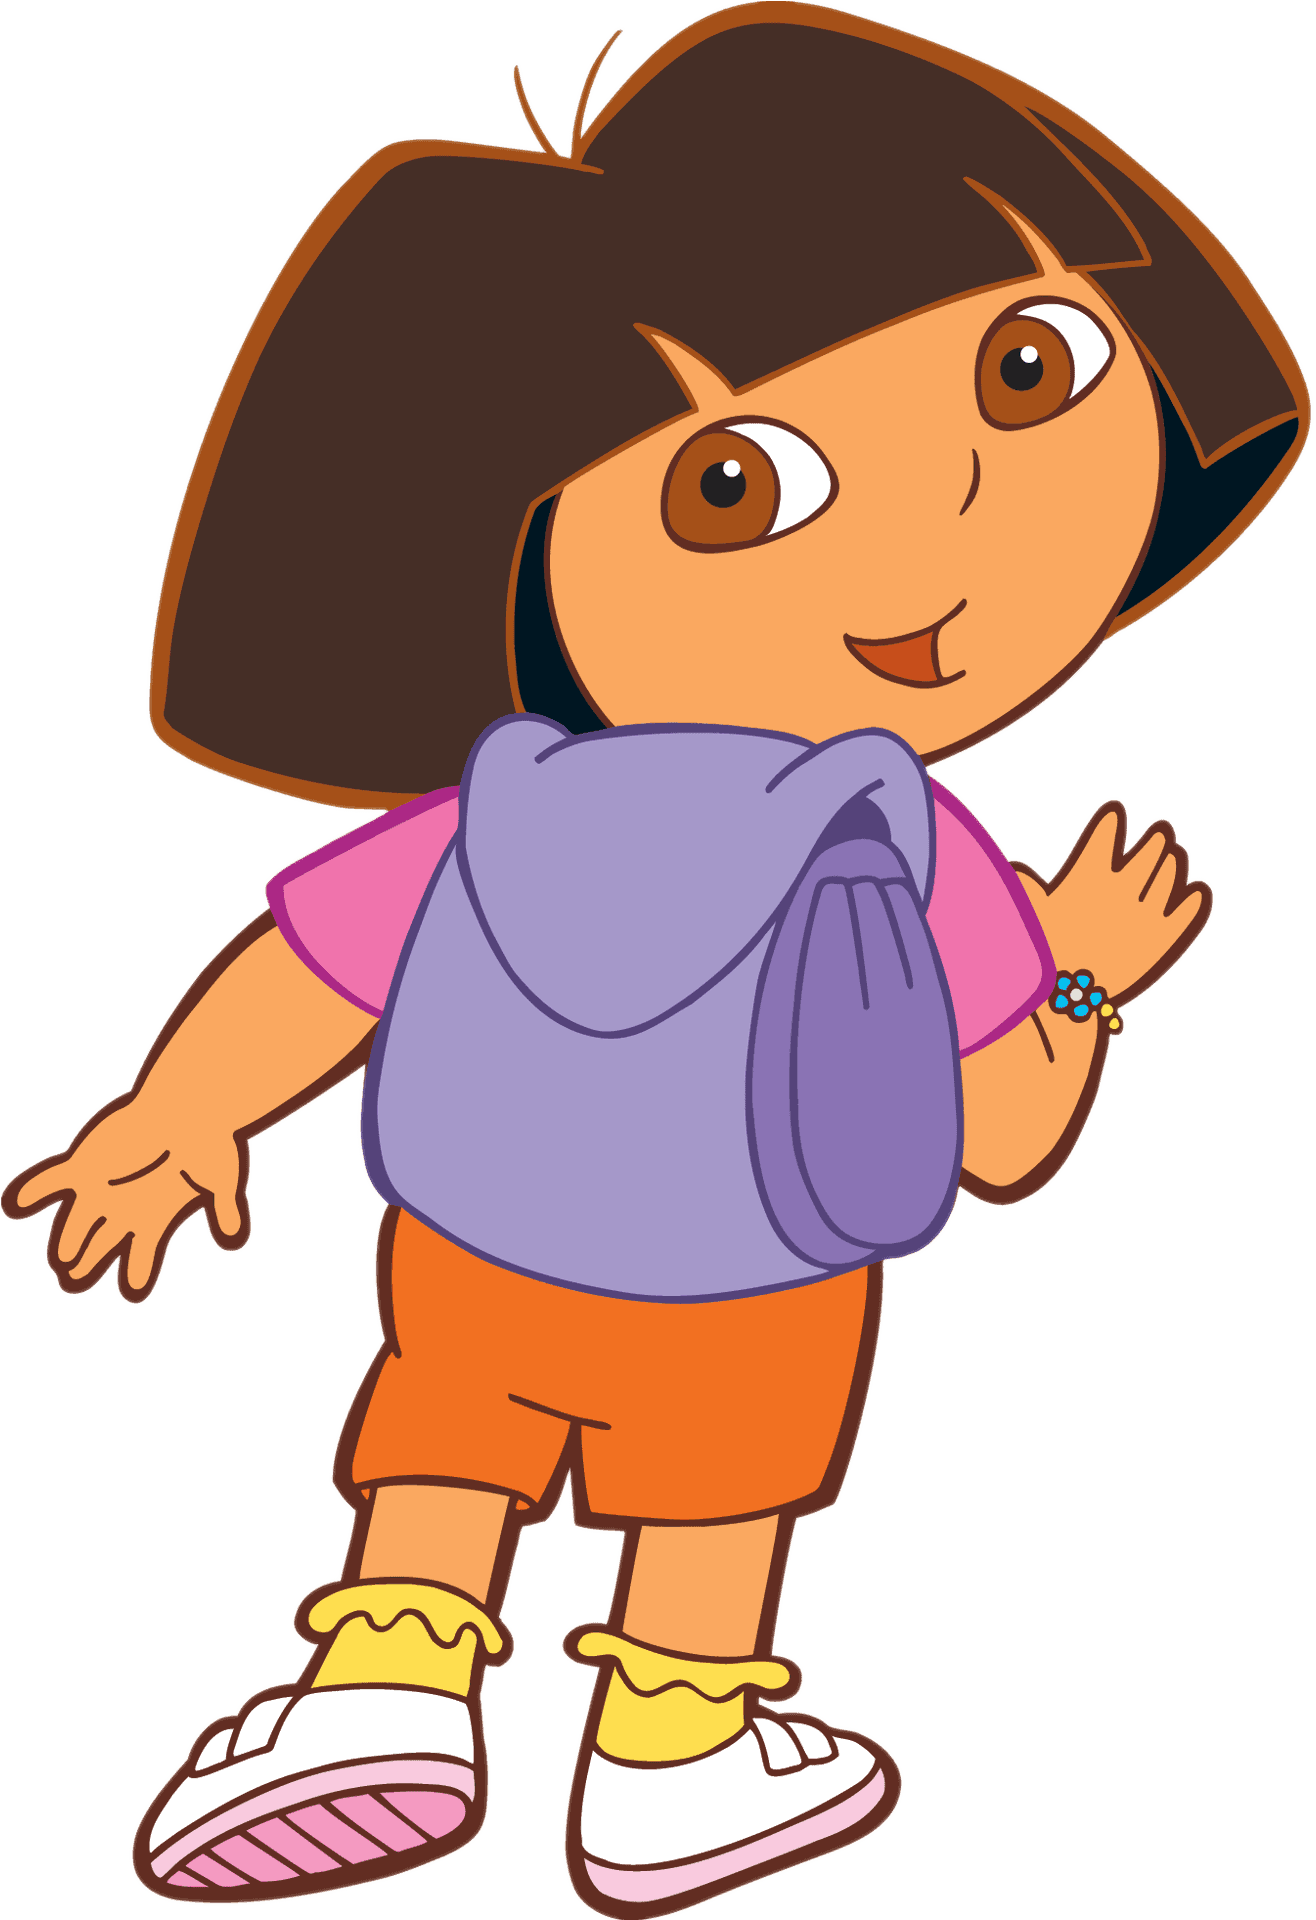 Dora The Explorer Animated Character PNG